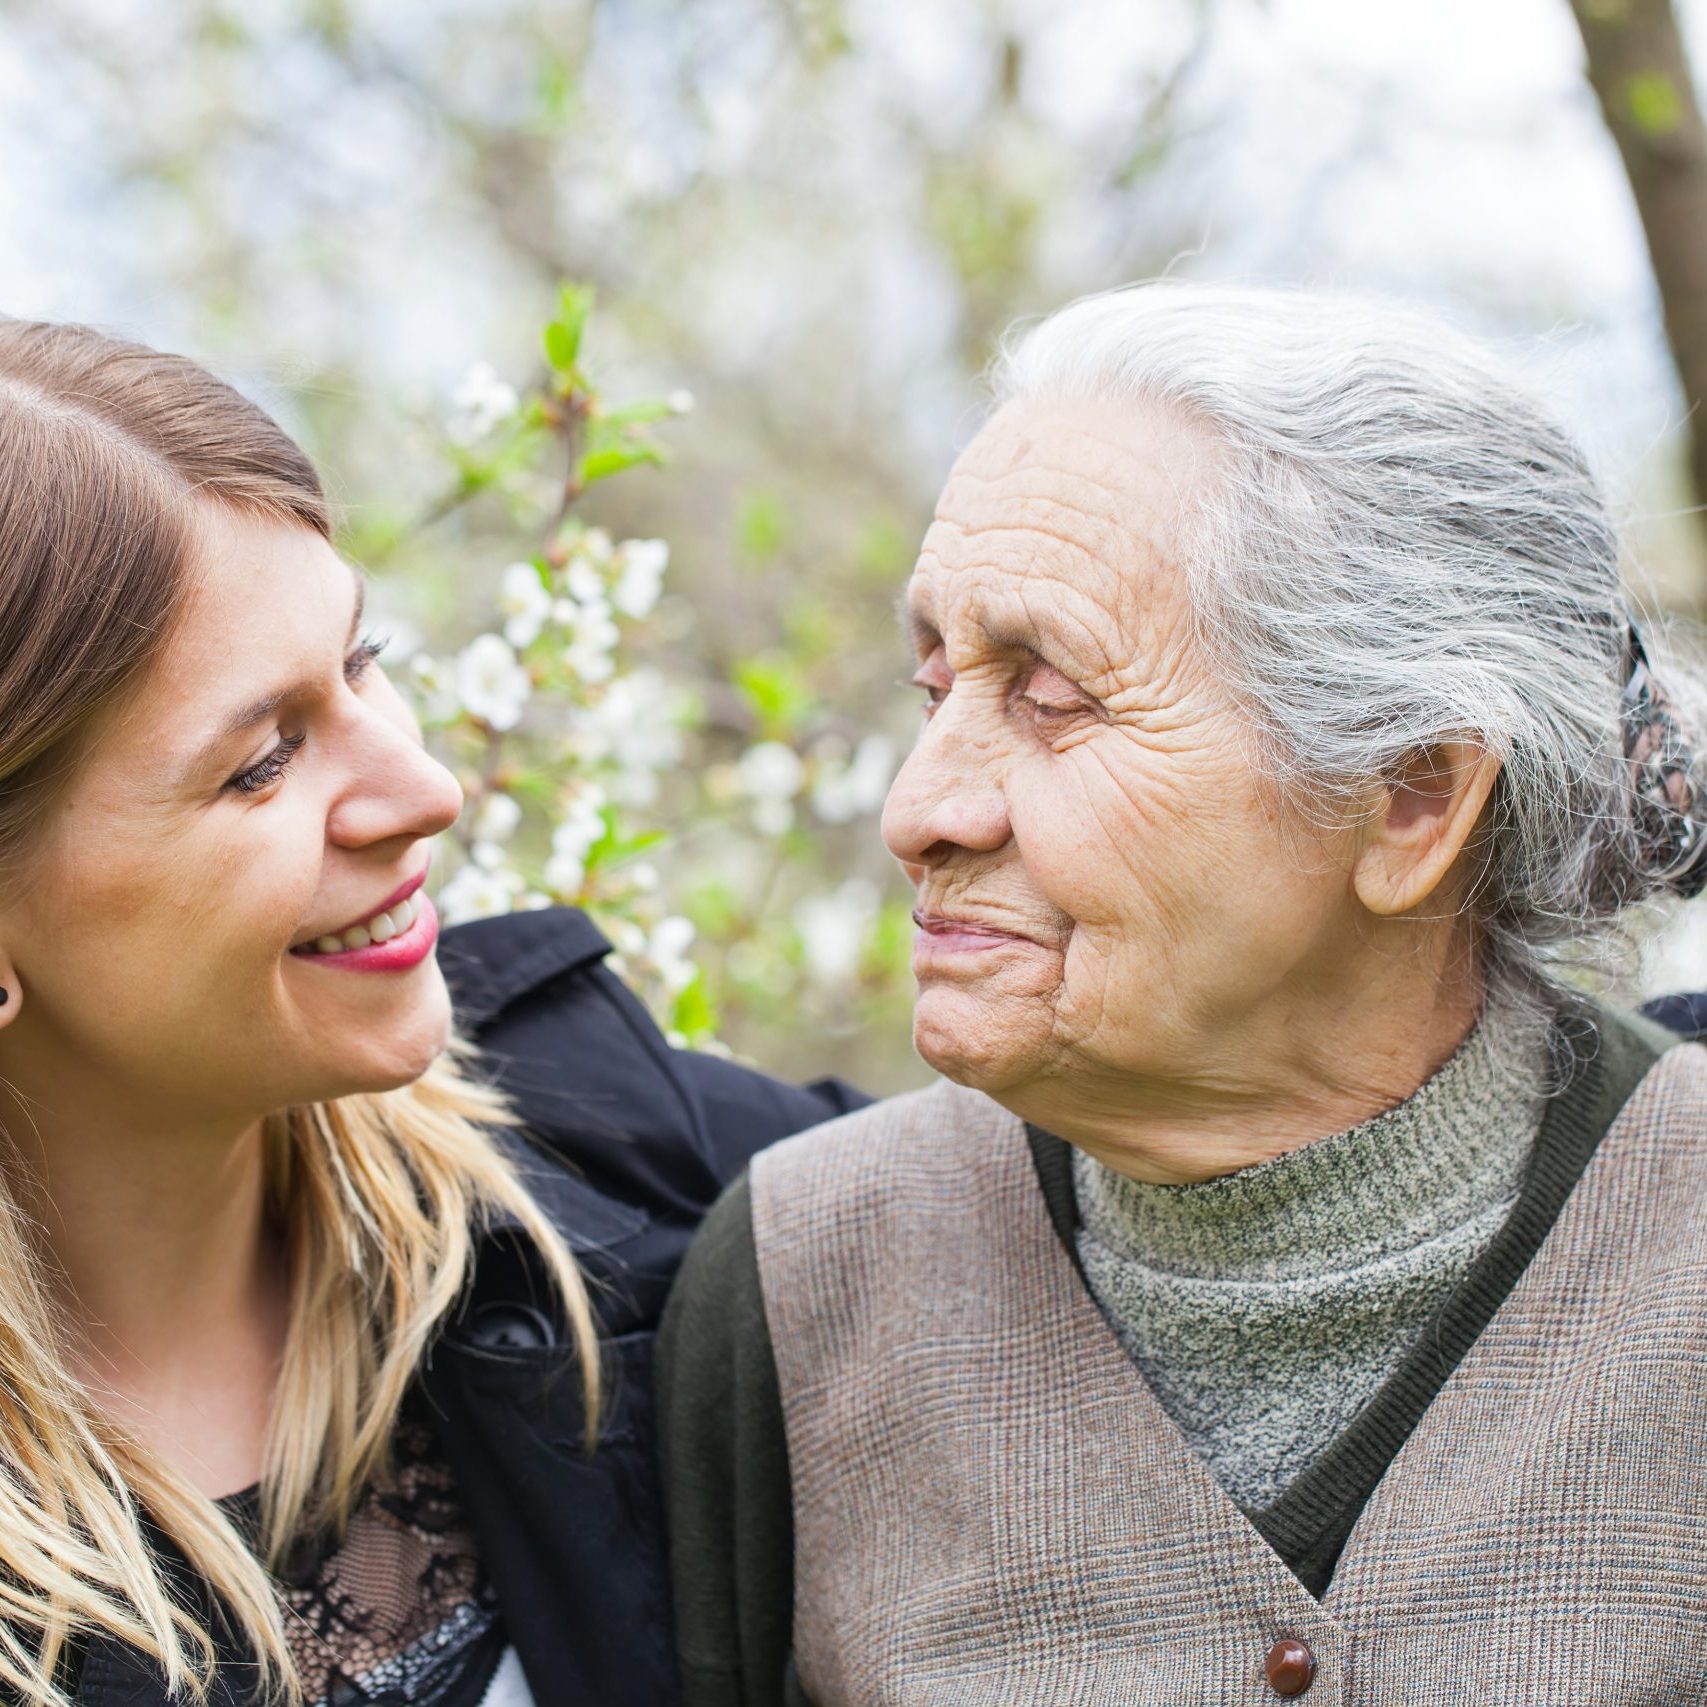 Picture of a happy elderly woman with her cheerful carer outdoor springtime